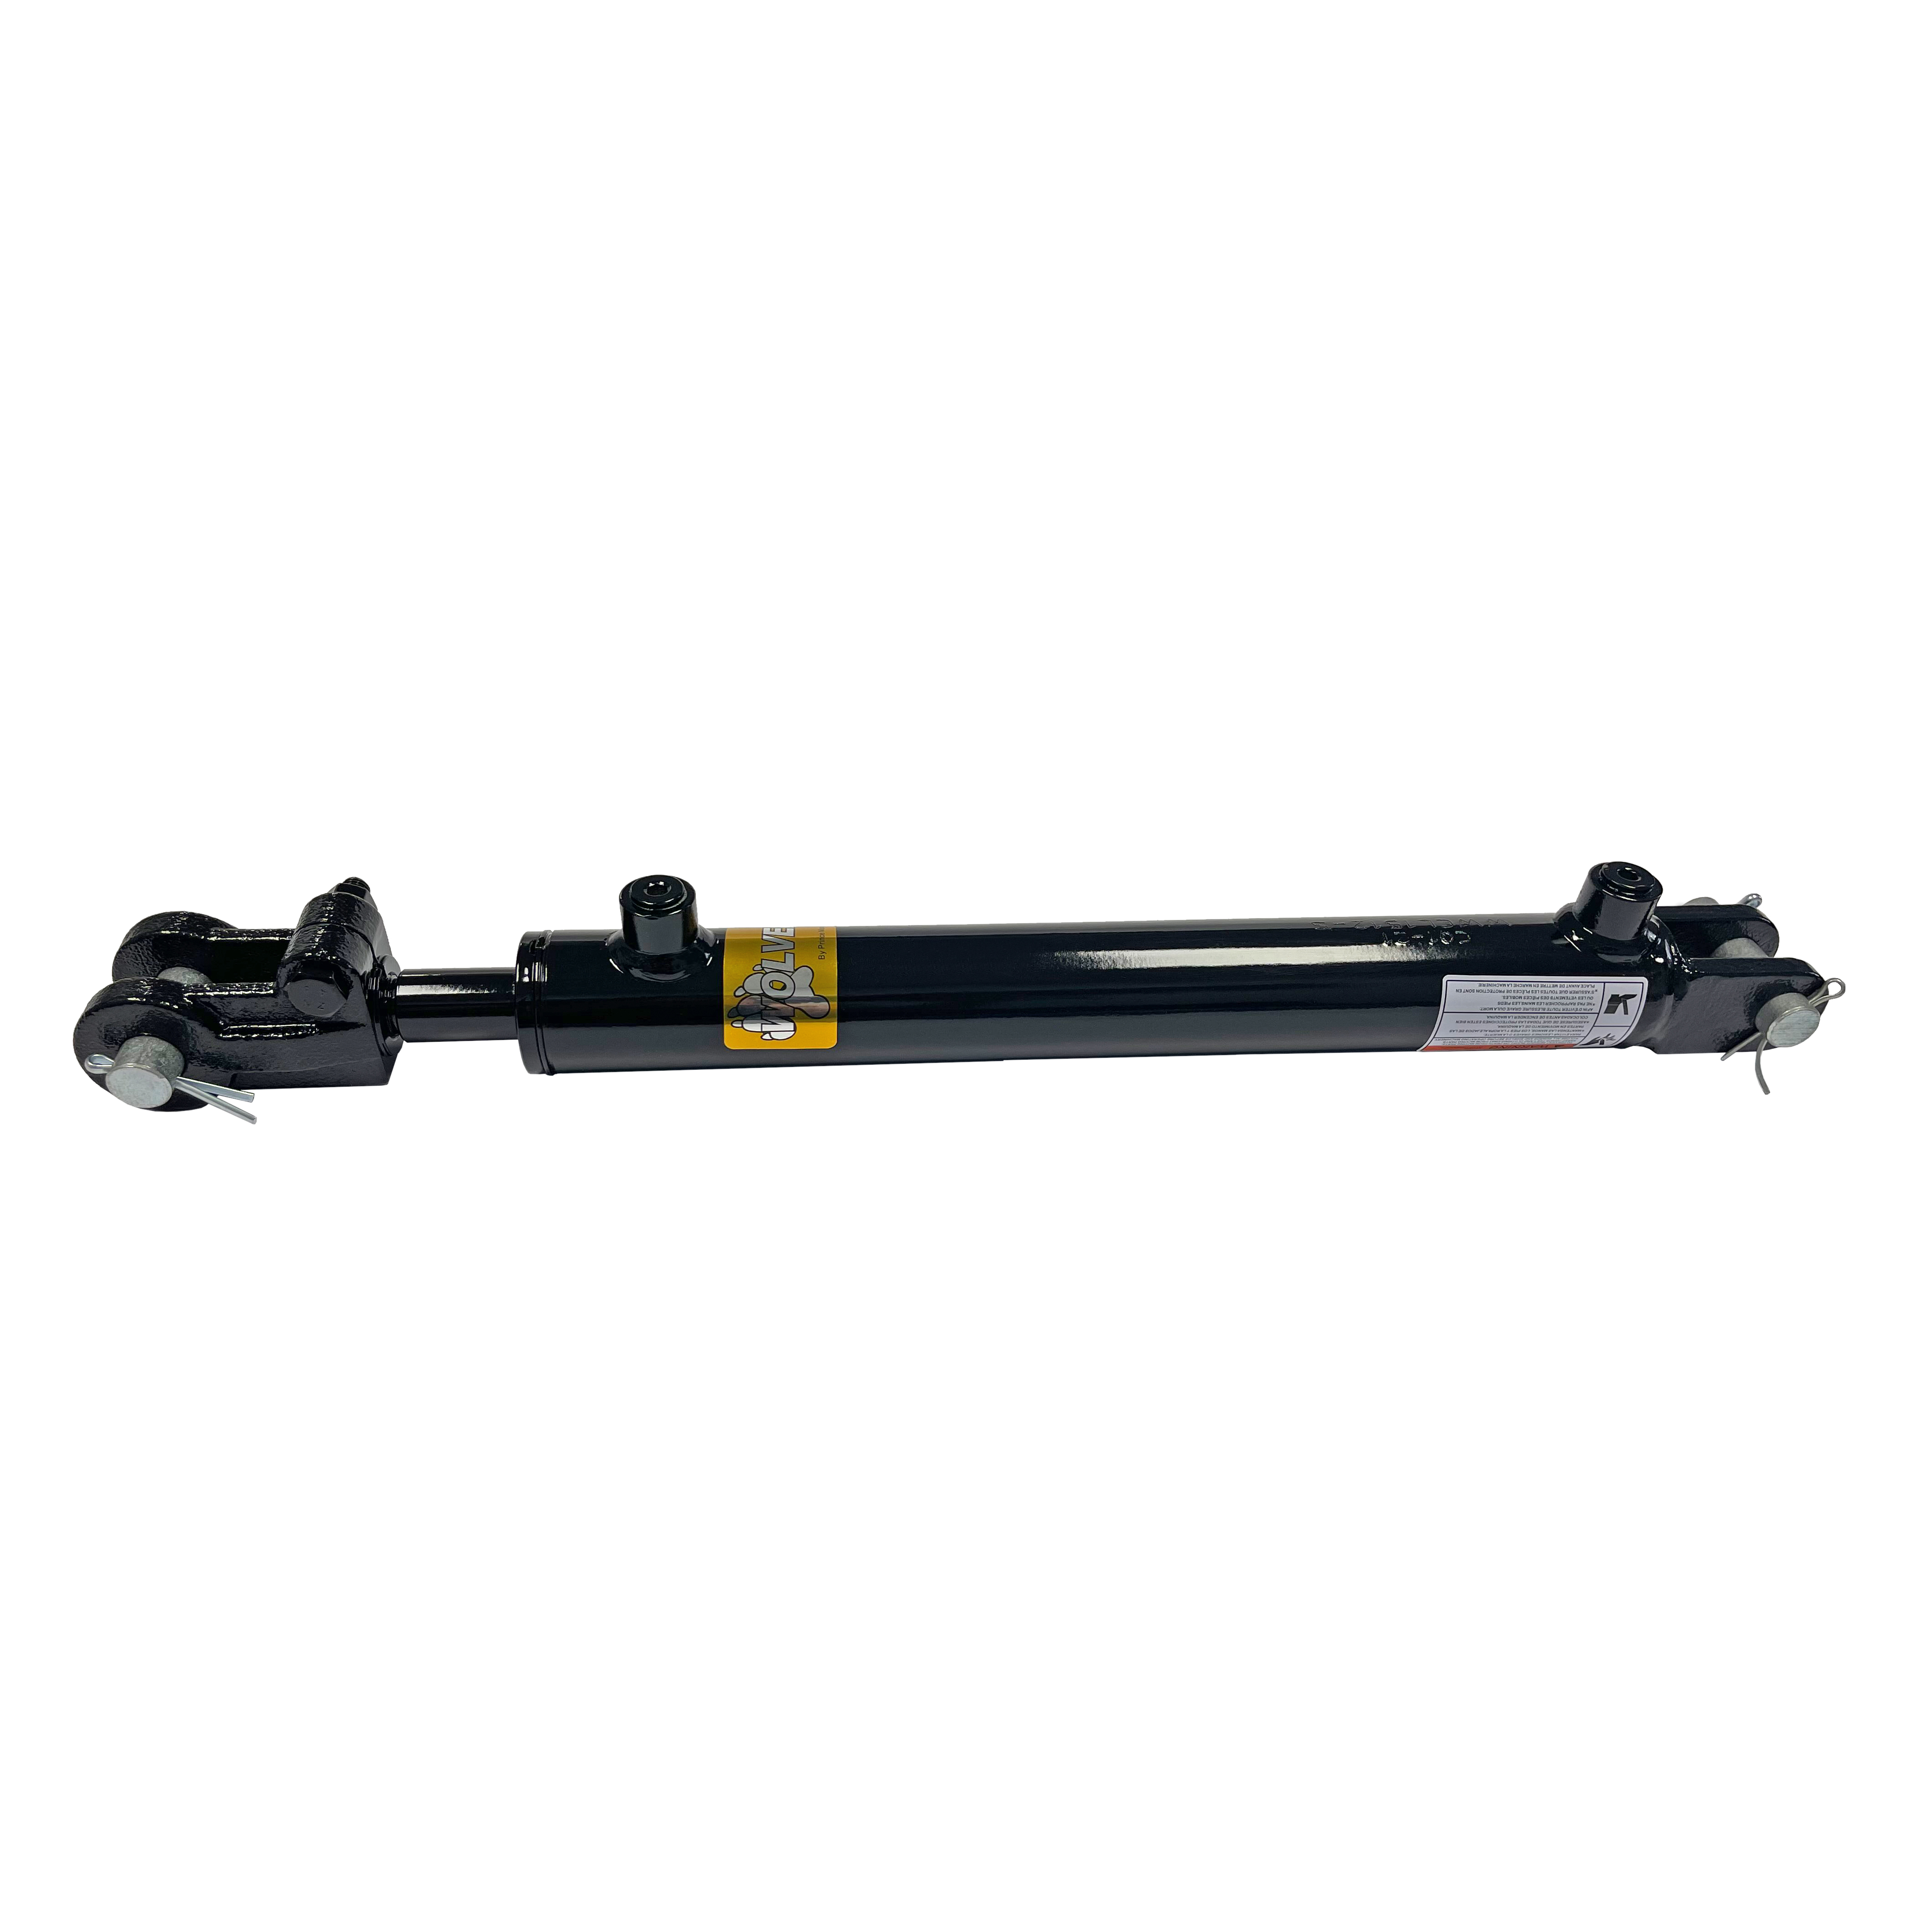 1.5 bore x 14 stroke Clevis hydraulic cylinder, welded Clevis double acting cylinder | Prince Hydraulics